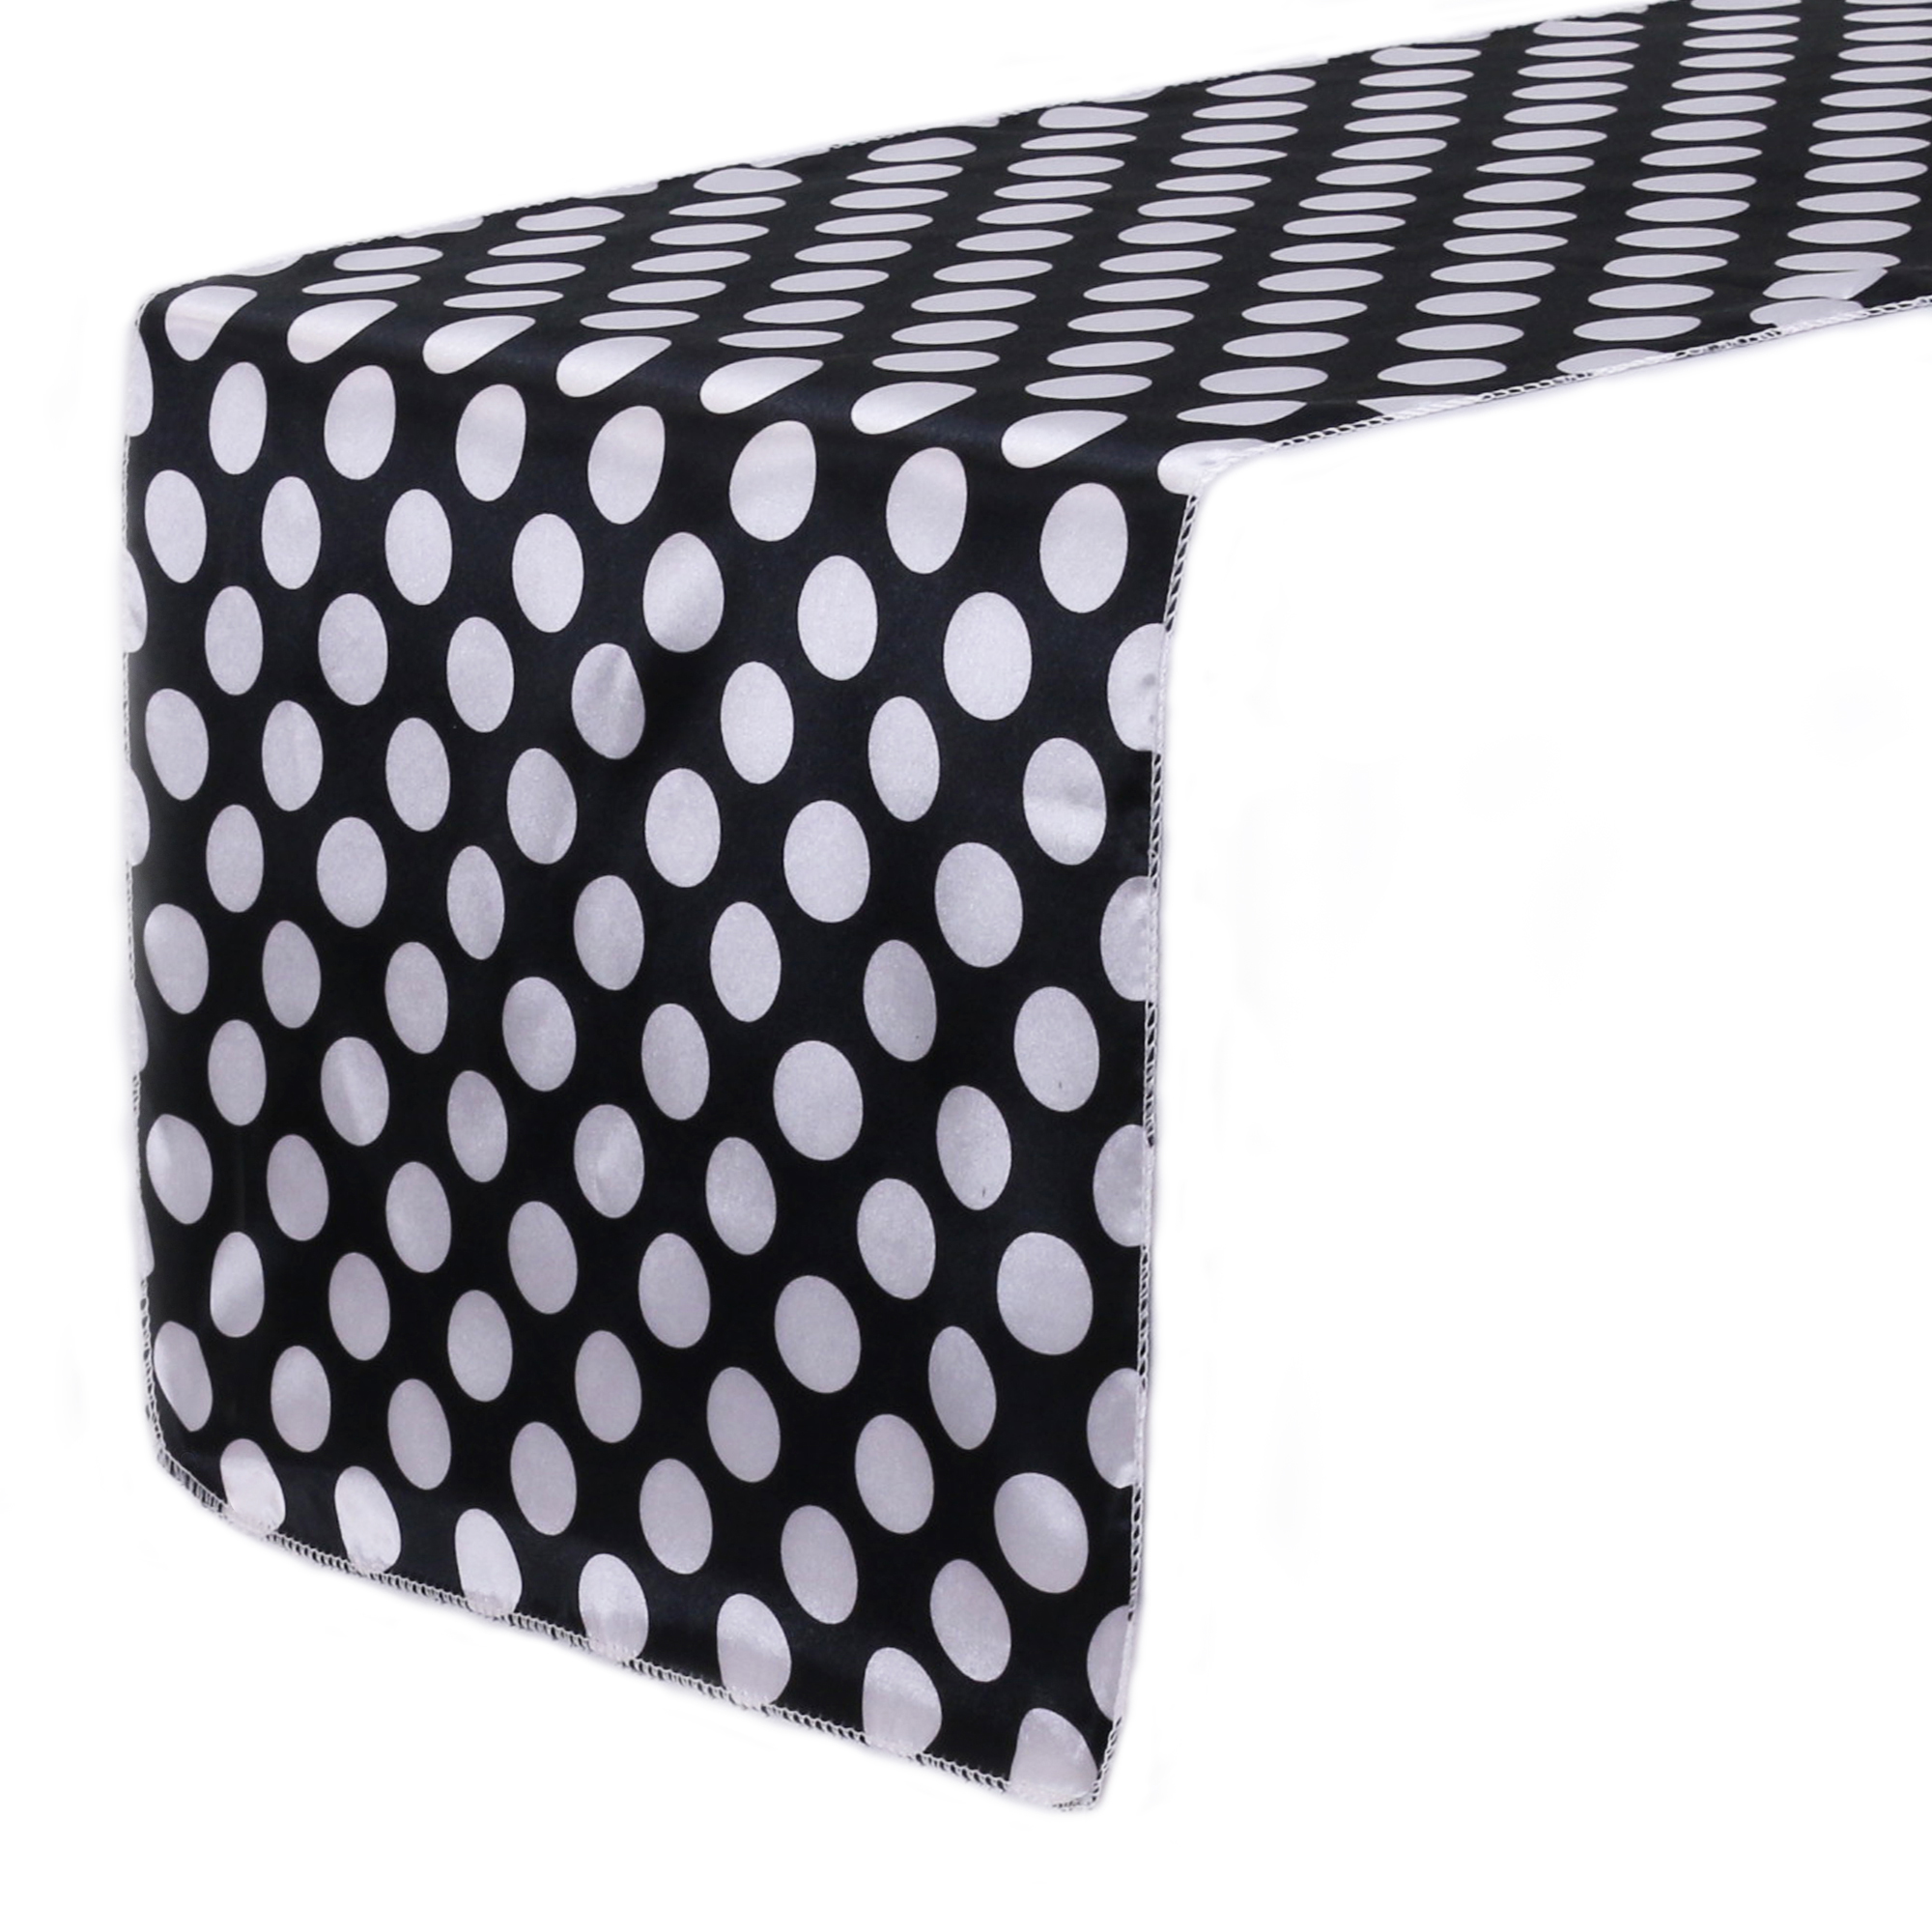 Movie Night Table Runner, 12 x 72 Inch Black and White Printed